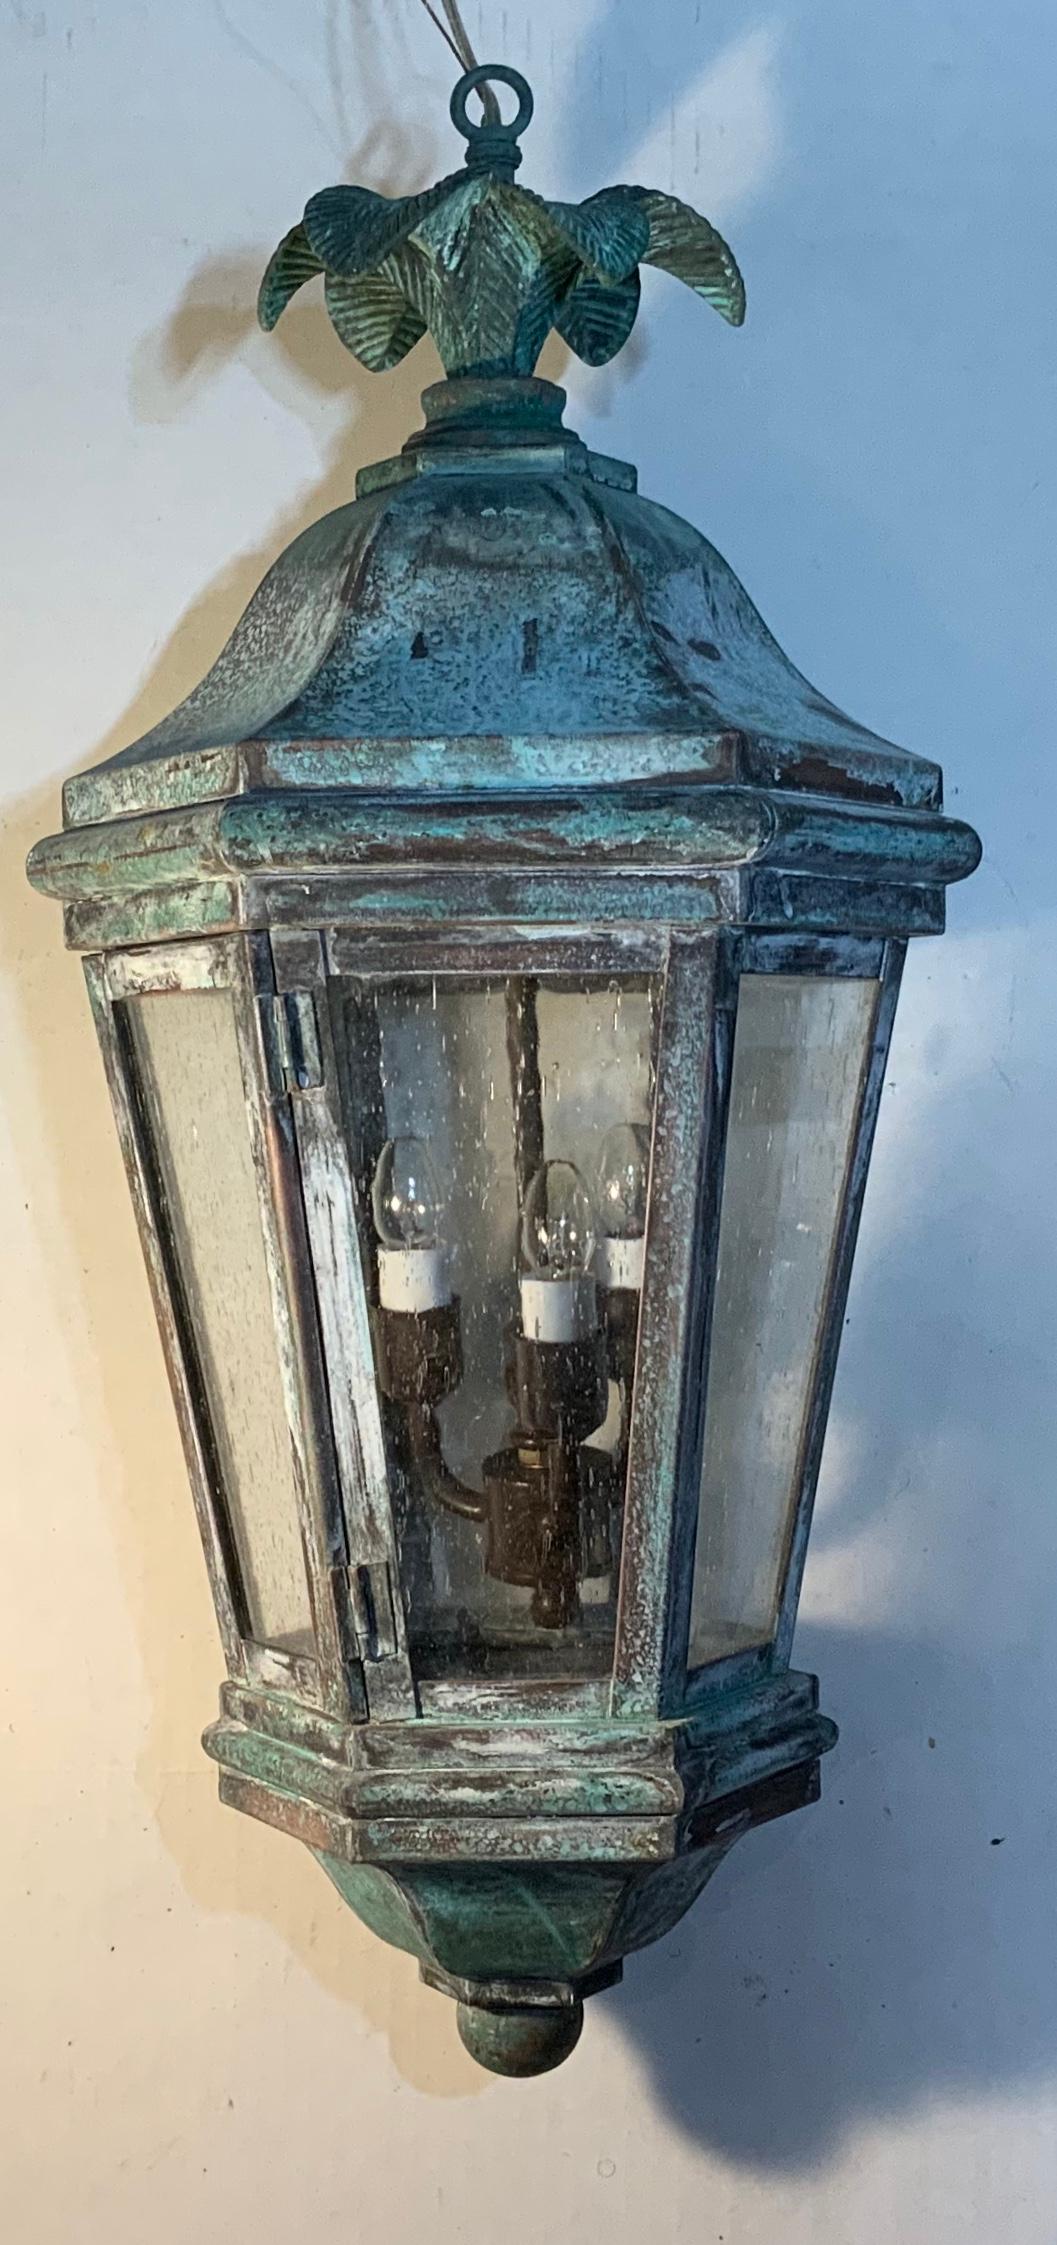 Funky lantern made of handcrafted solid brass, bronze top with decorative palm leaf motif, weathered patina, electrified with three 40/watt lights, good for wet locations and would look great indoor as chandelier. Seeded glass.